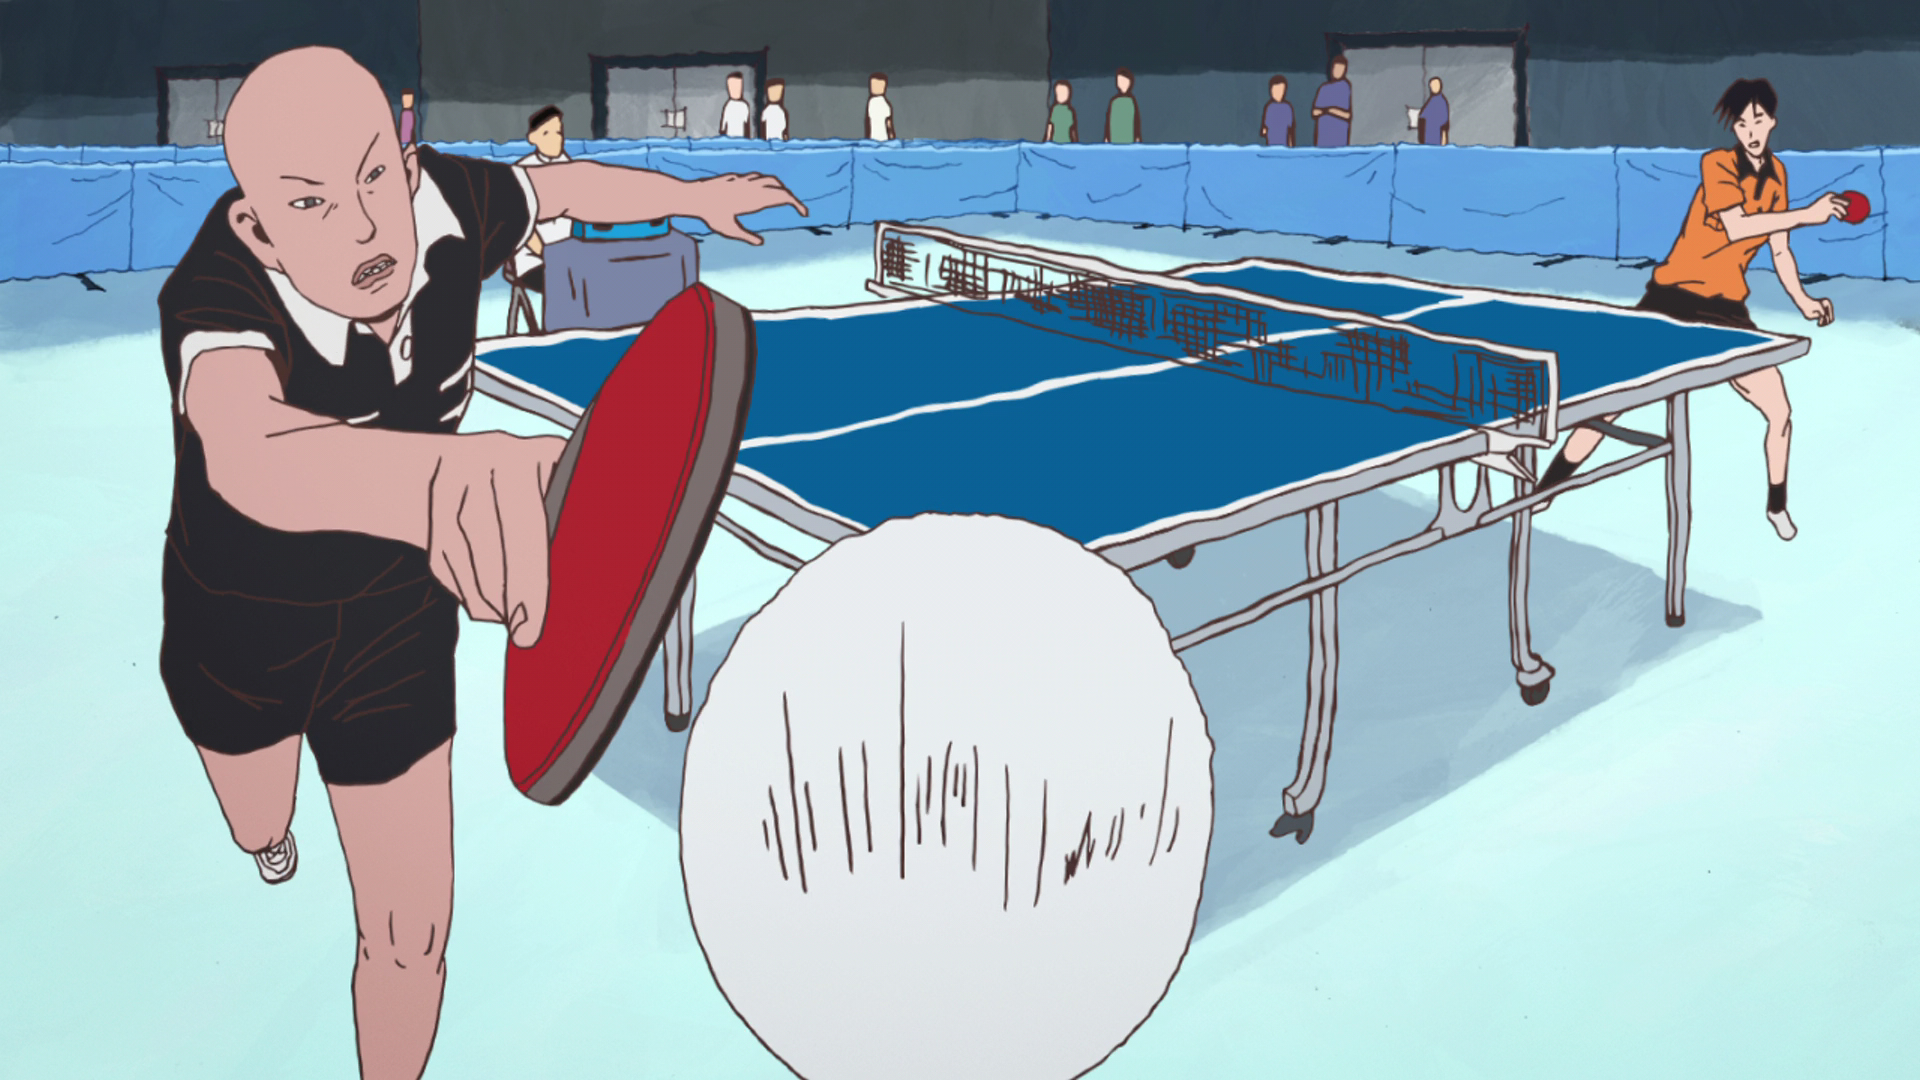 A still from 'Ping Pong the Animation'.